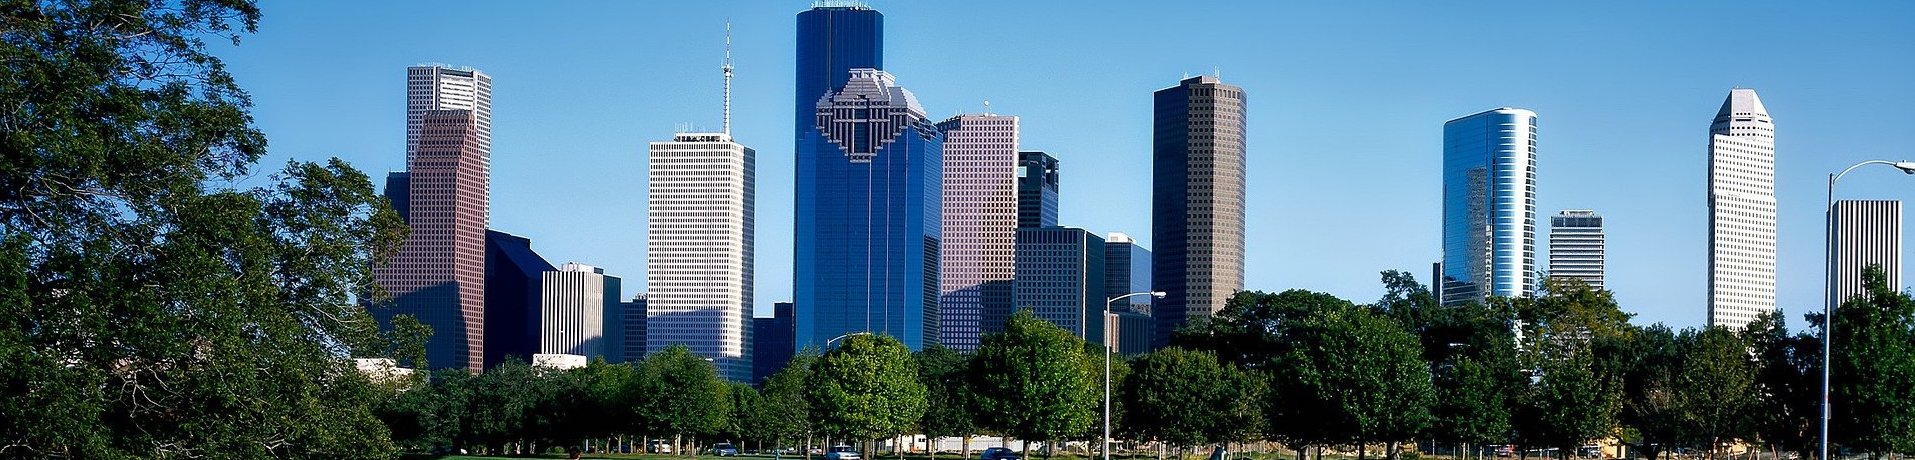  View of the Houston Skyline on sunny day